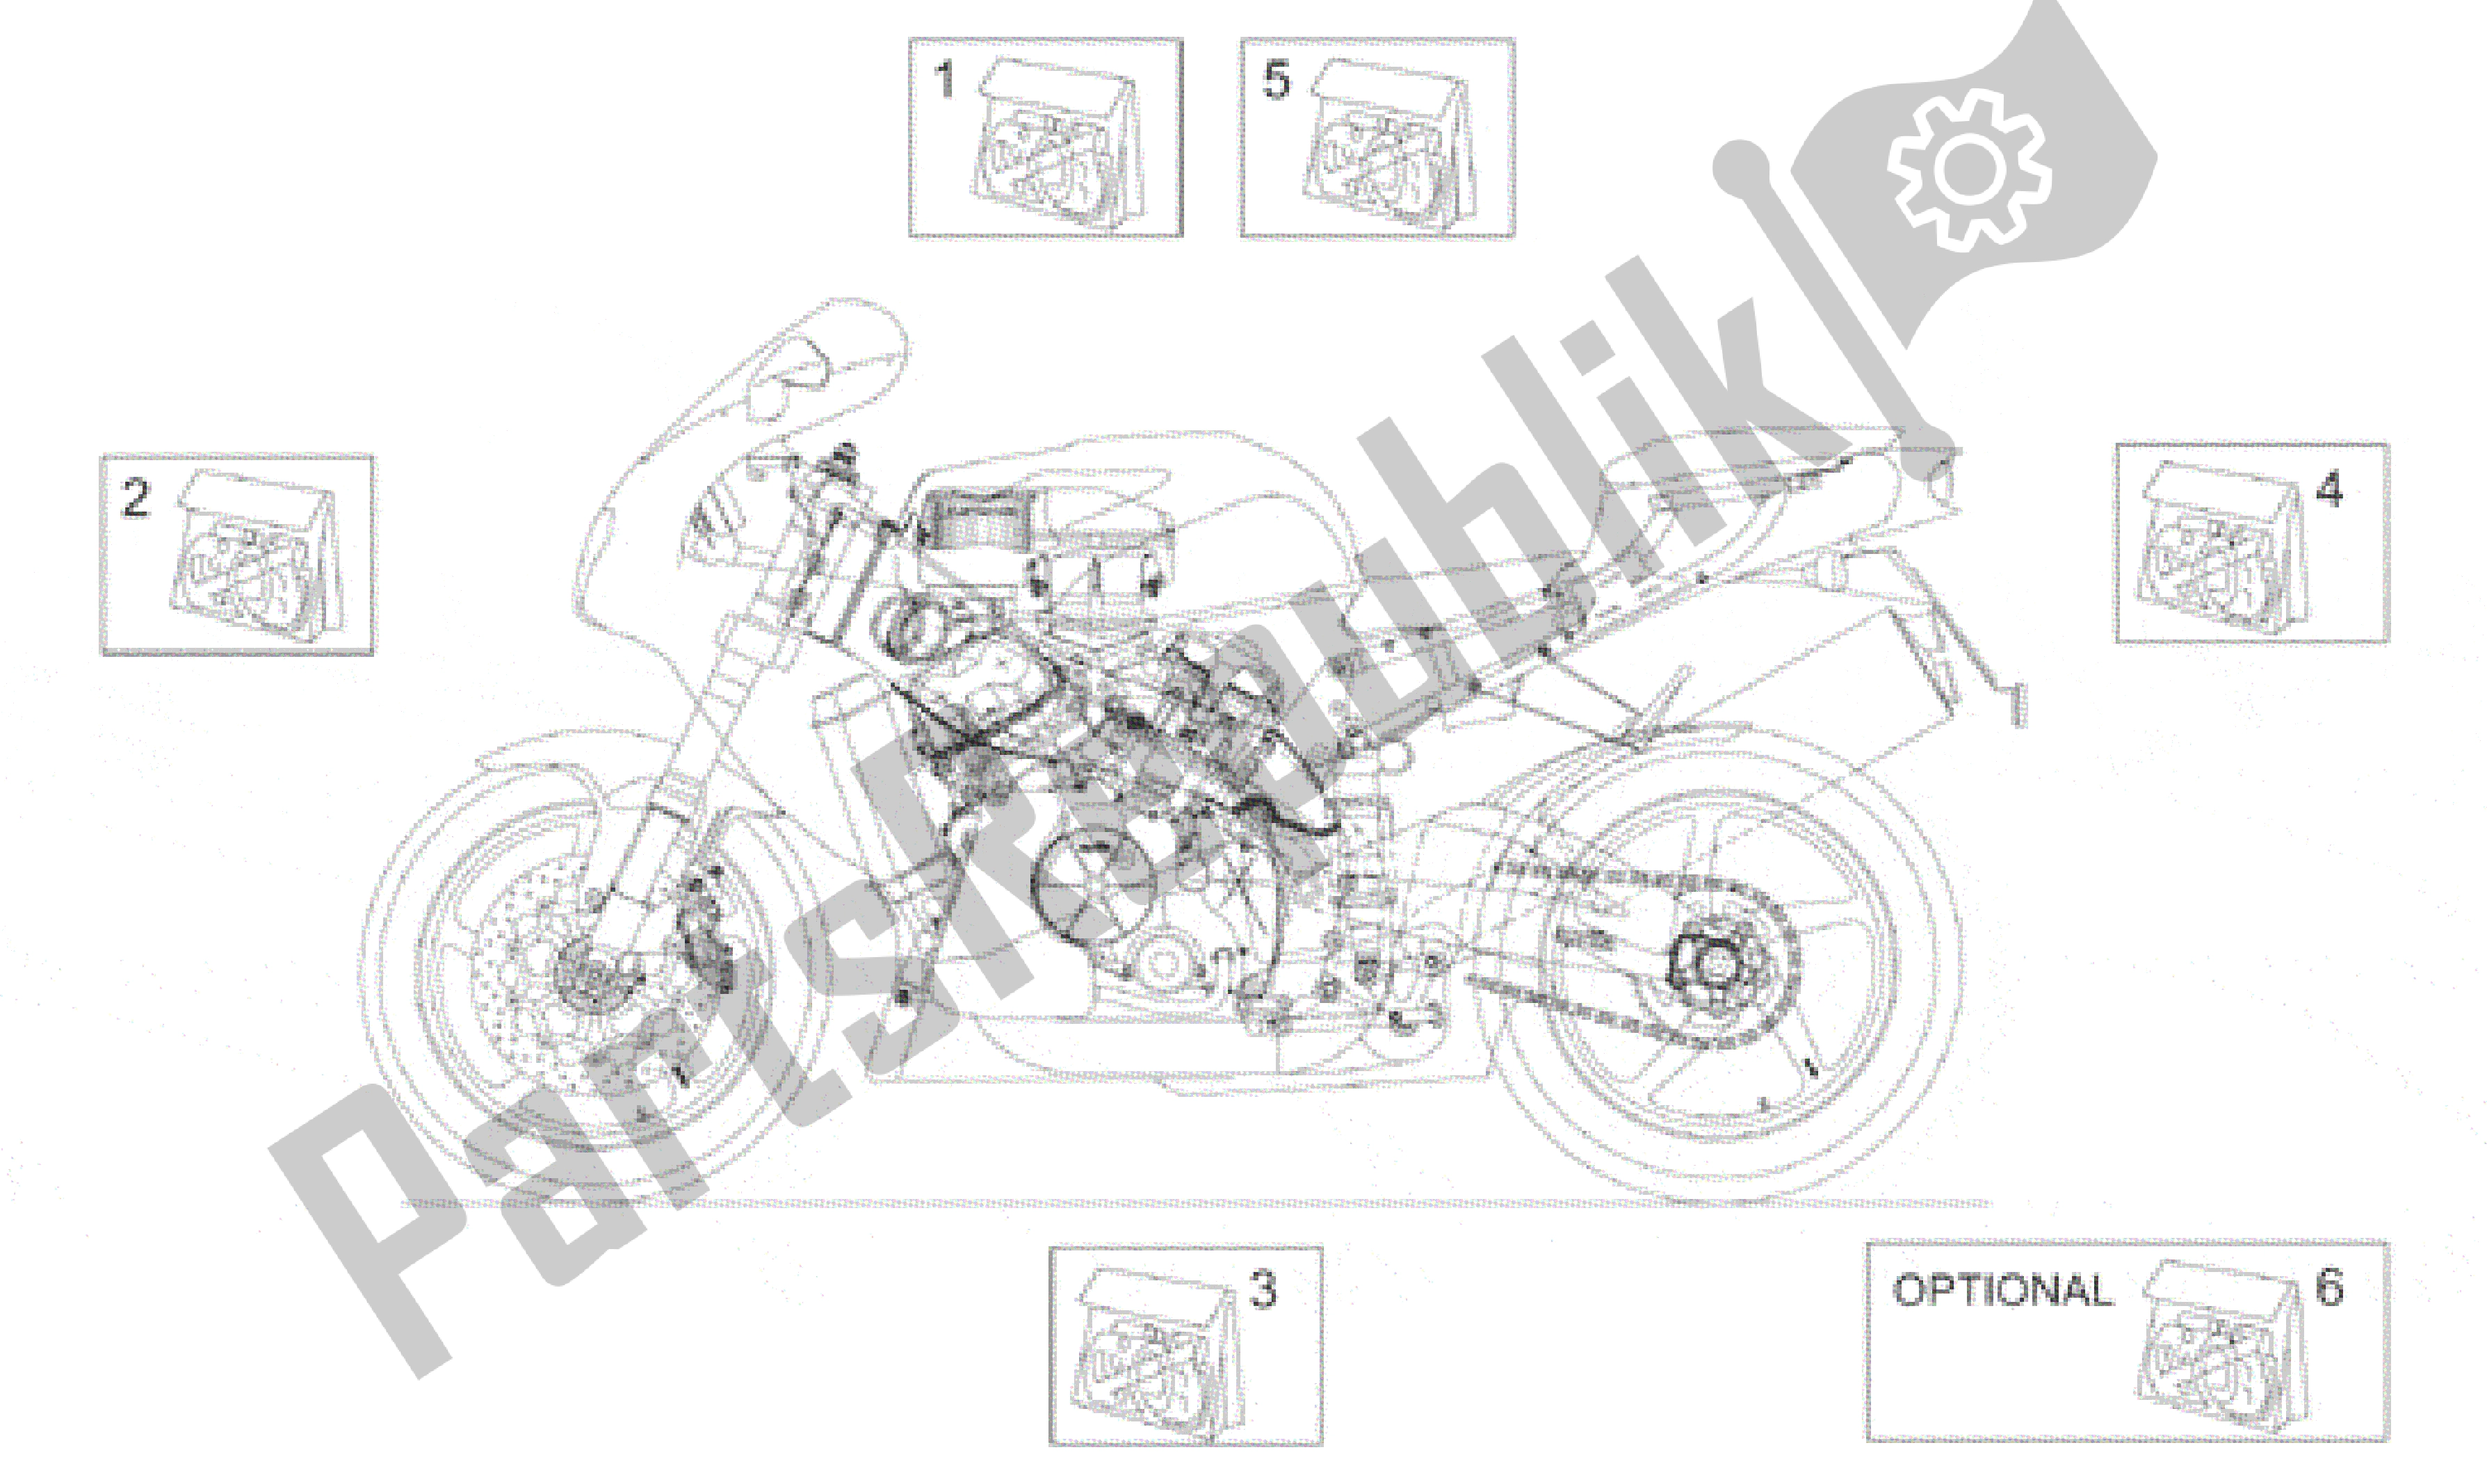 All parts for the Decal of the Aprilia RSV Mille R 3901 1000 2001 - 2002